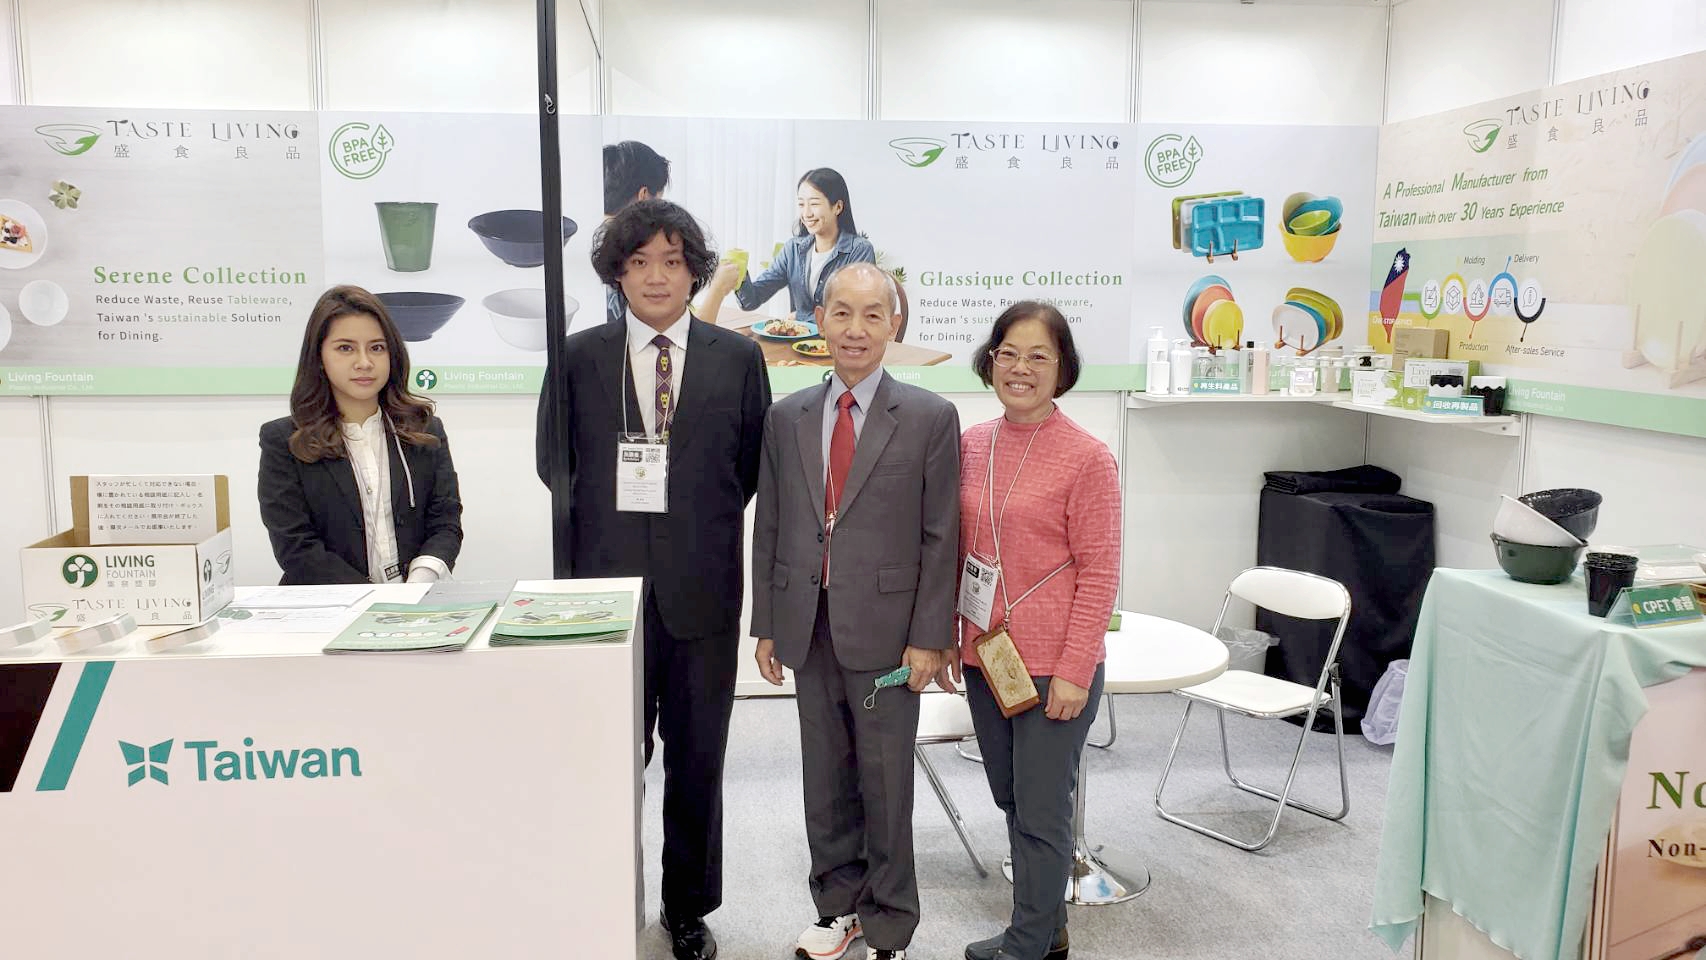 Thank you for visiting our booth at IPF 2023!